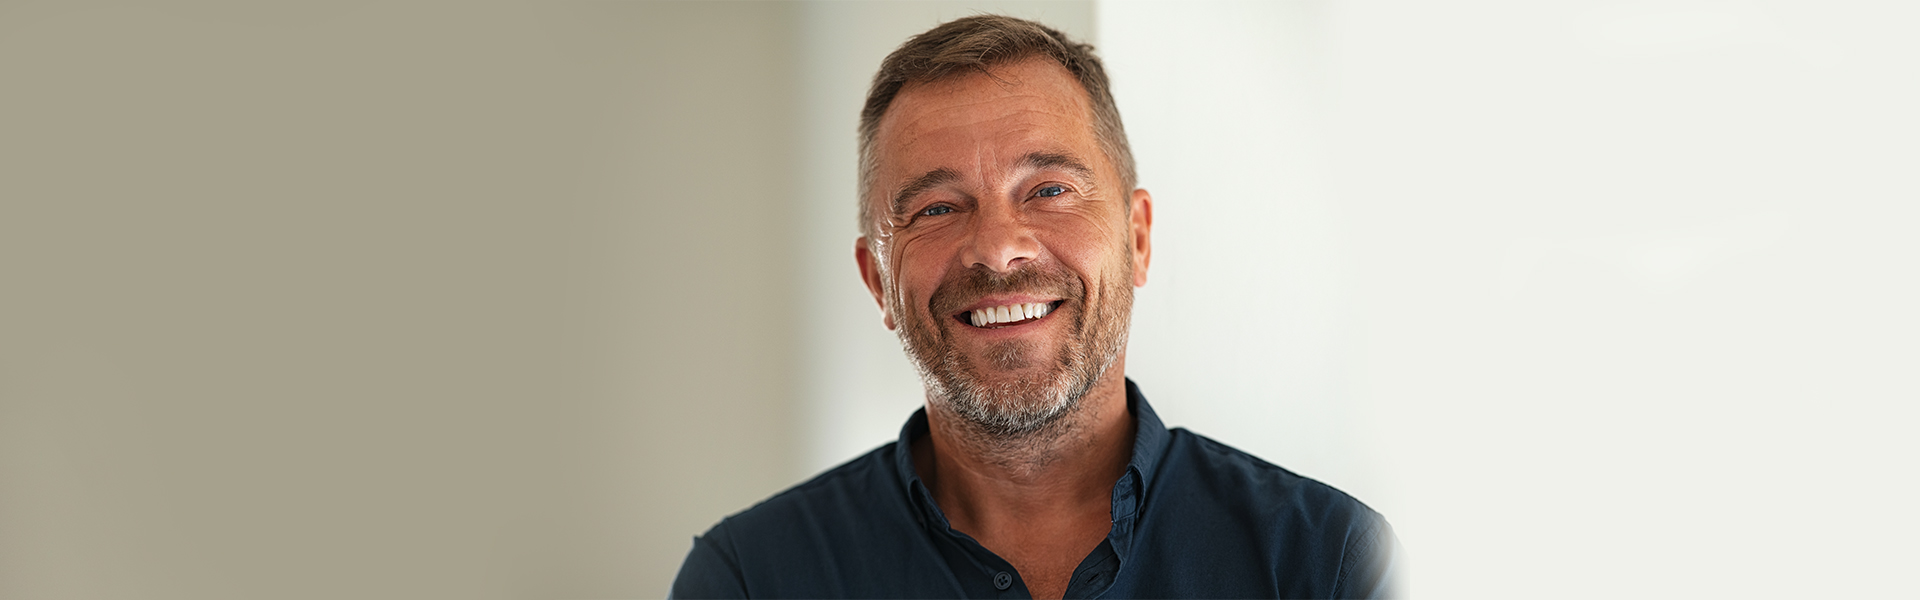 What Should You Look for in a Dental Implant Surgeon?